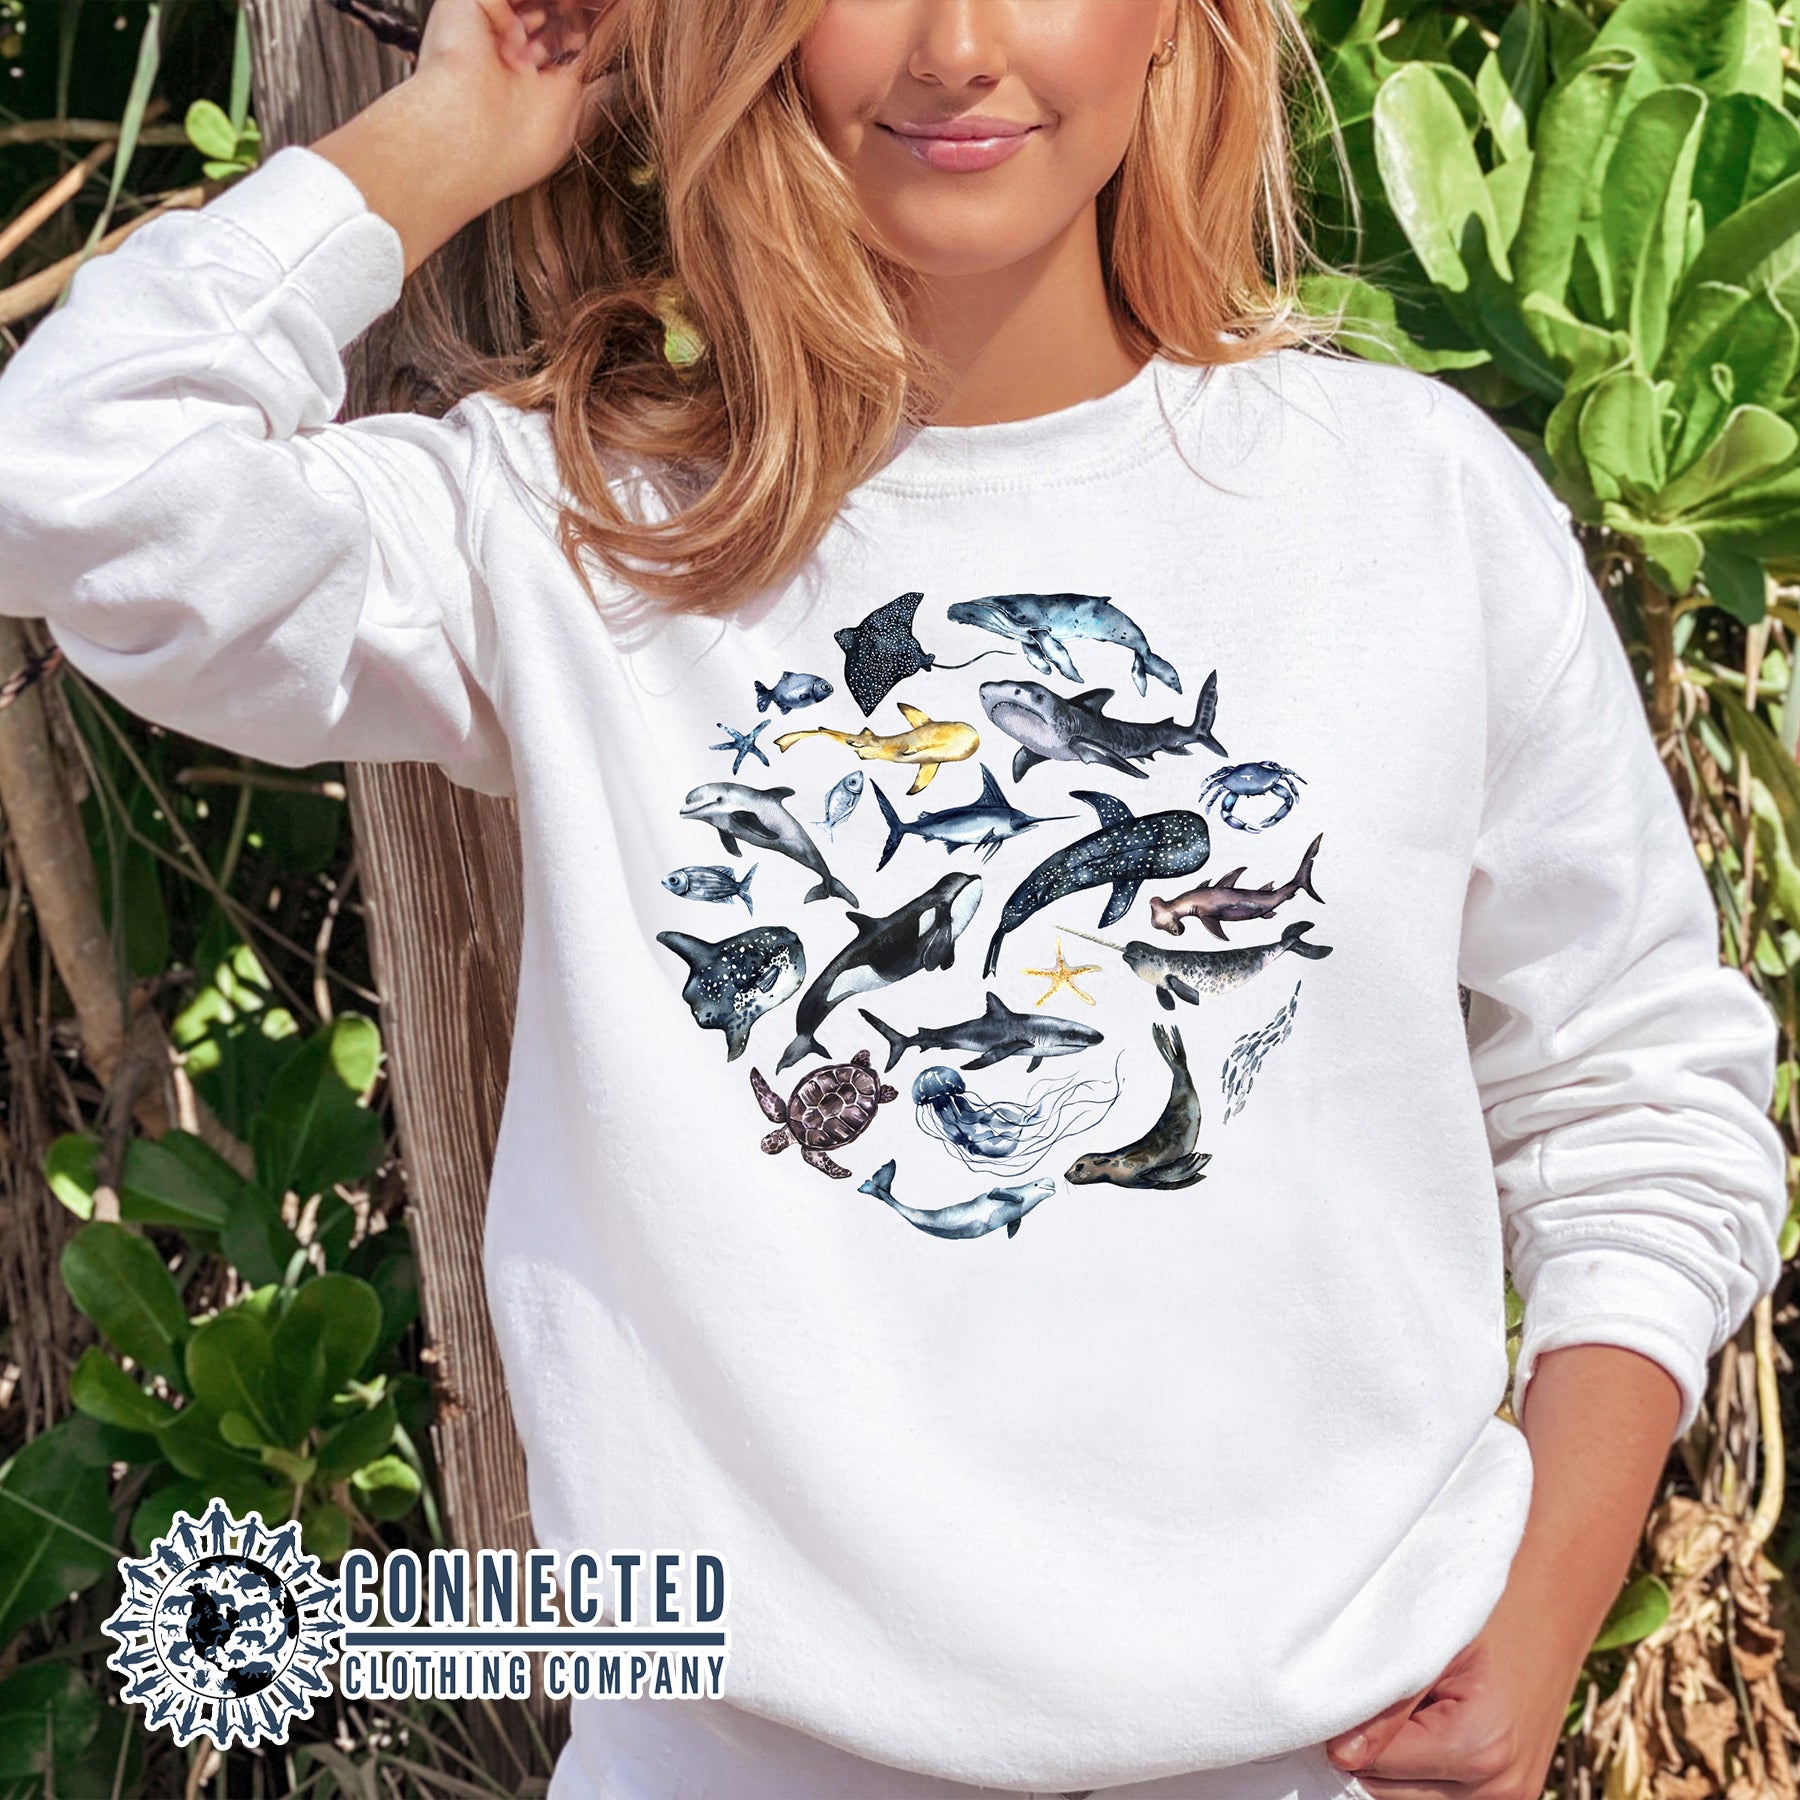 Blue Ocean Sea Creatures Sweatshirt - Connected Clothing Company - 10% of proceeds donated to ocean conservation